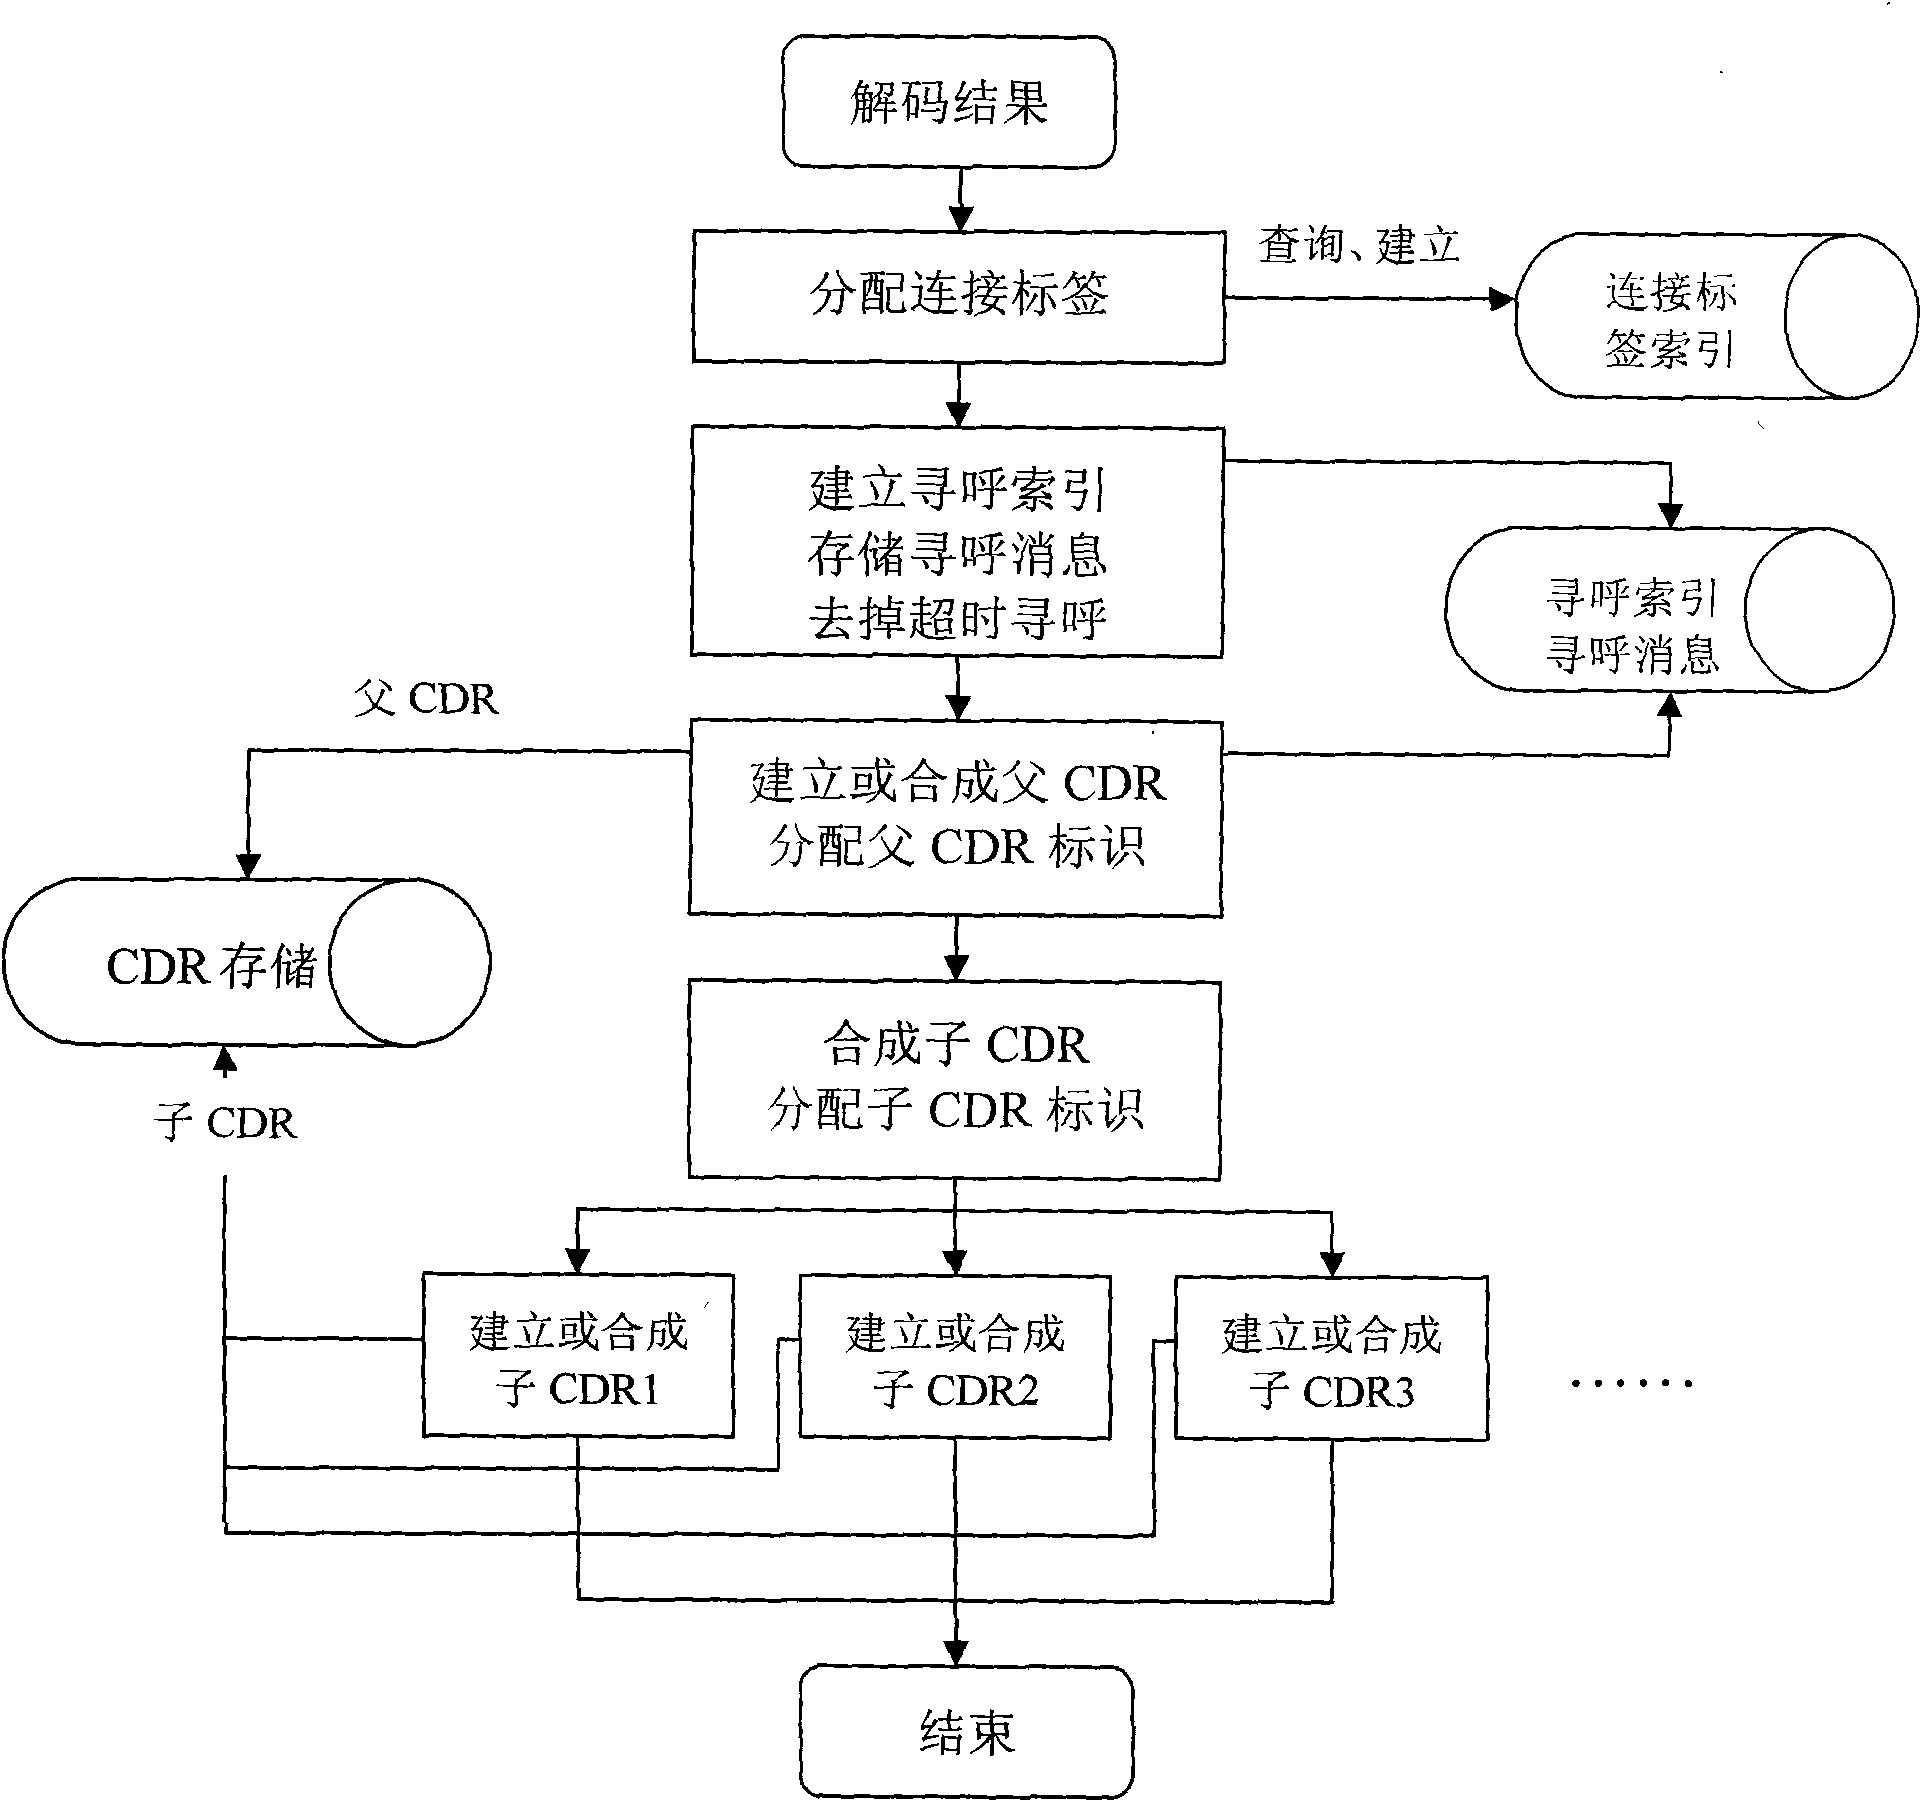 Multi-service call synthetic method in a GSM communication system